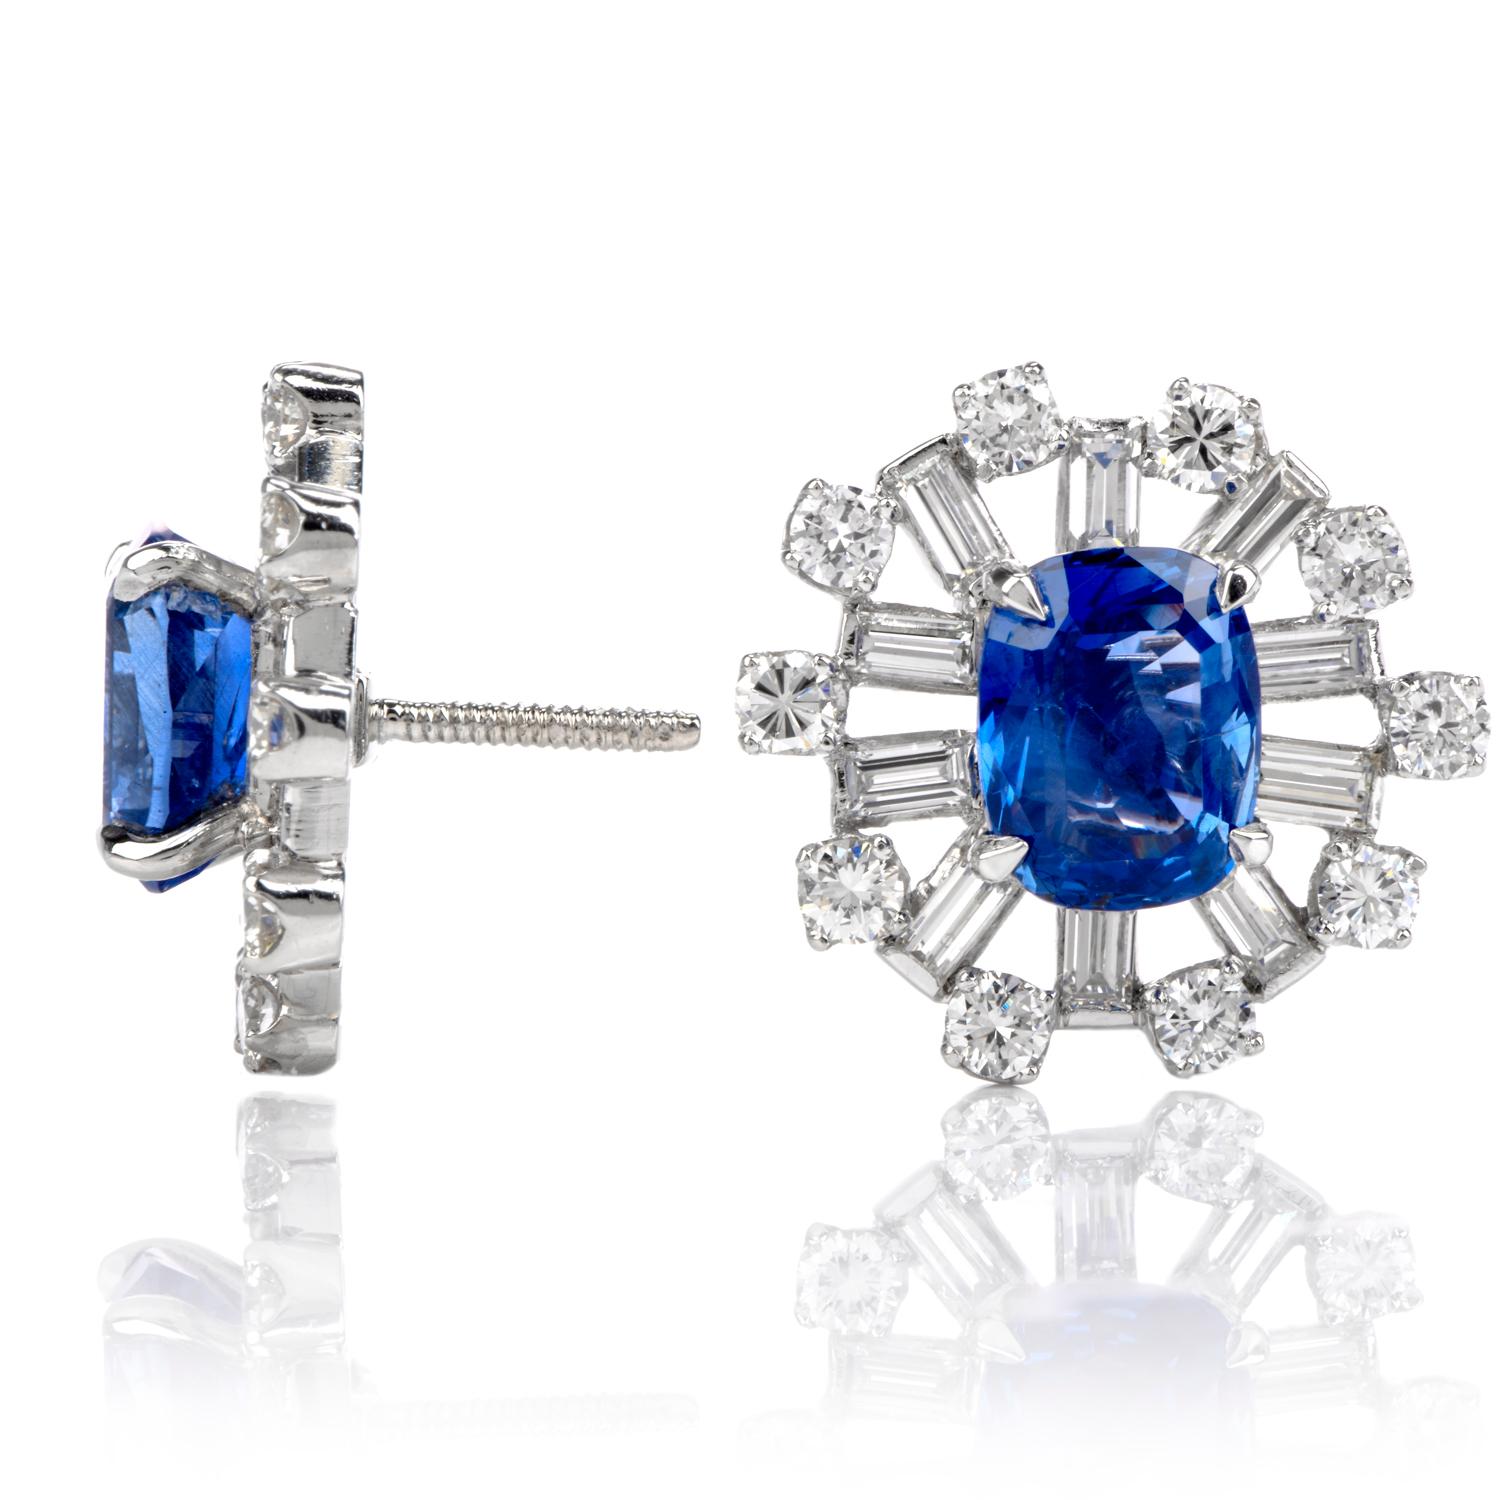 These stunning sapphire and diamond earrings are handcrafted in solid platinum, weighing 15.0 grams and measuring 19mm wide. Displaying a pair of centered GIA lab reported natural, no heat, Cylon blue sapphires, one weighing 4.74 carats and